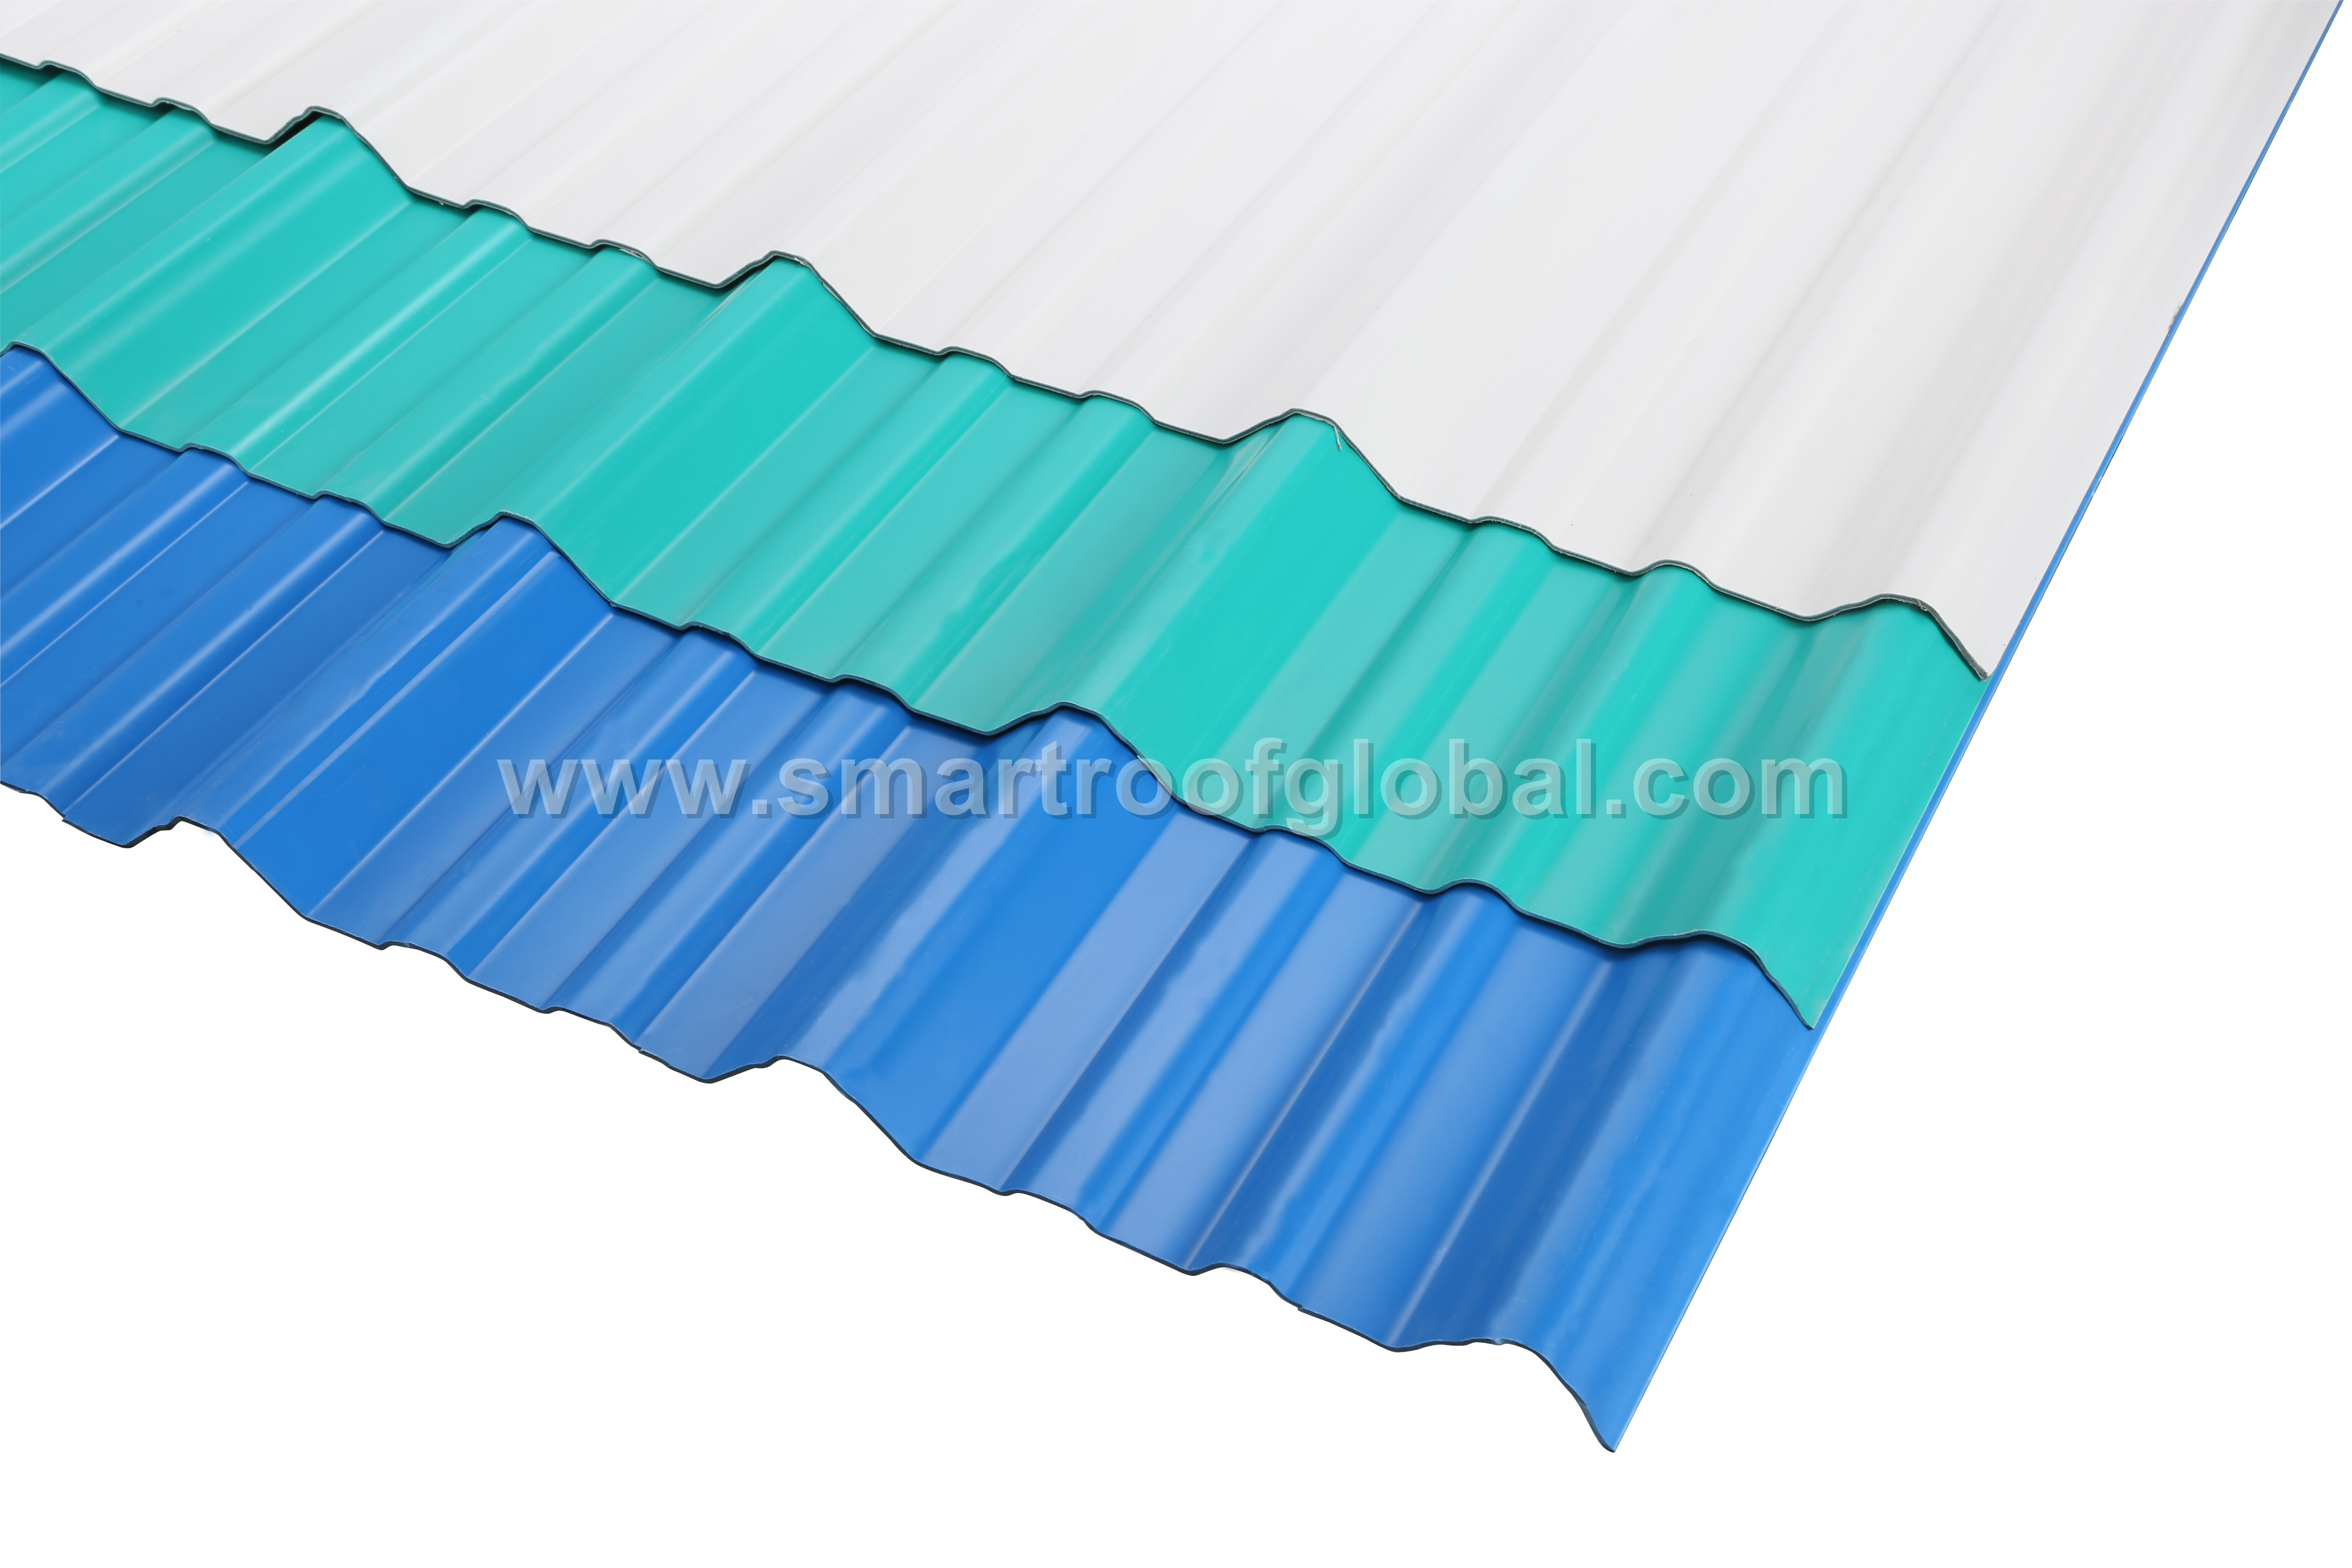 Special Design for Tile Roofing - Polycarbonate Sheets For Greenhouse – Smartroof Featured Image